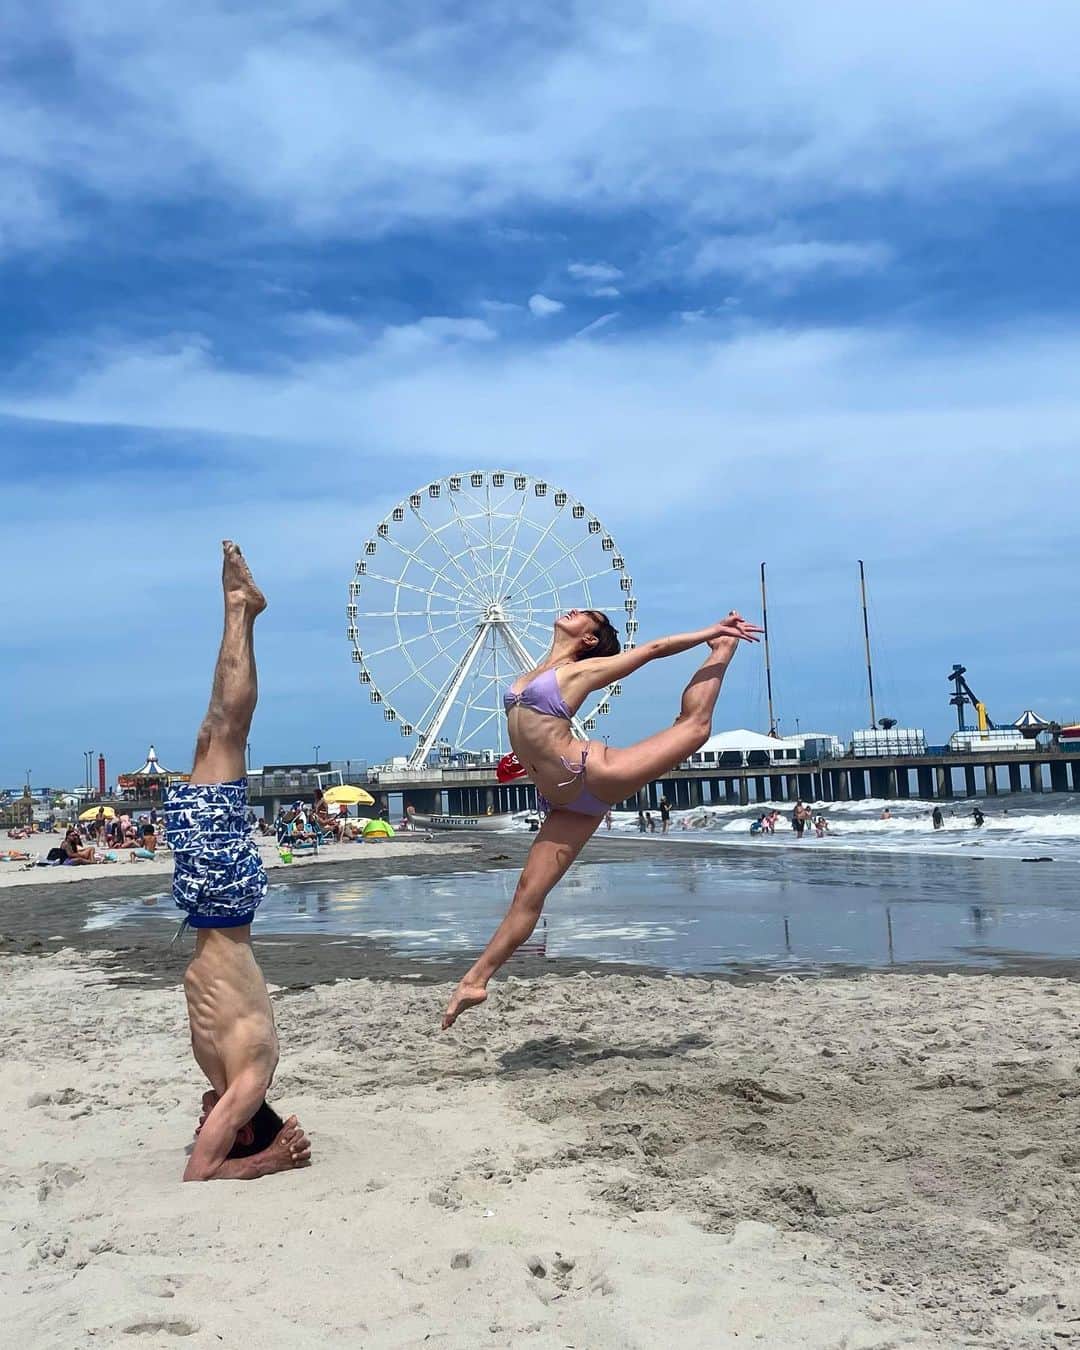 Lily Saito (齊藤莉理)のインスタグラム：「Saito Family is back in Atlantic City!! 🙏🏻 Blessed to have the sun come out for us today, as it was supposed to rain all day!! ☀️」